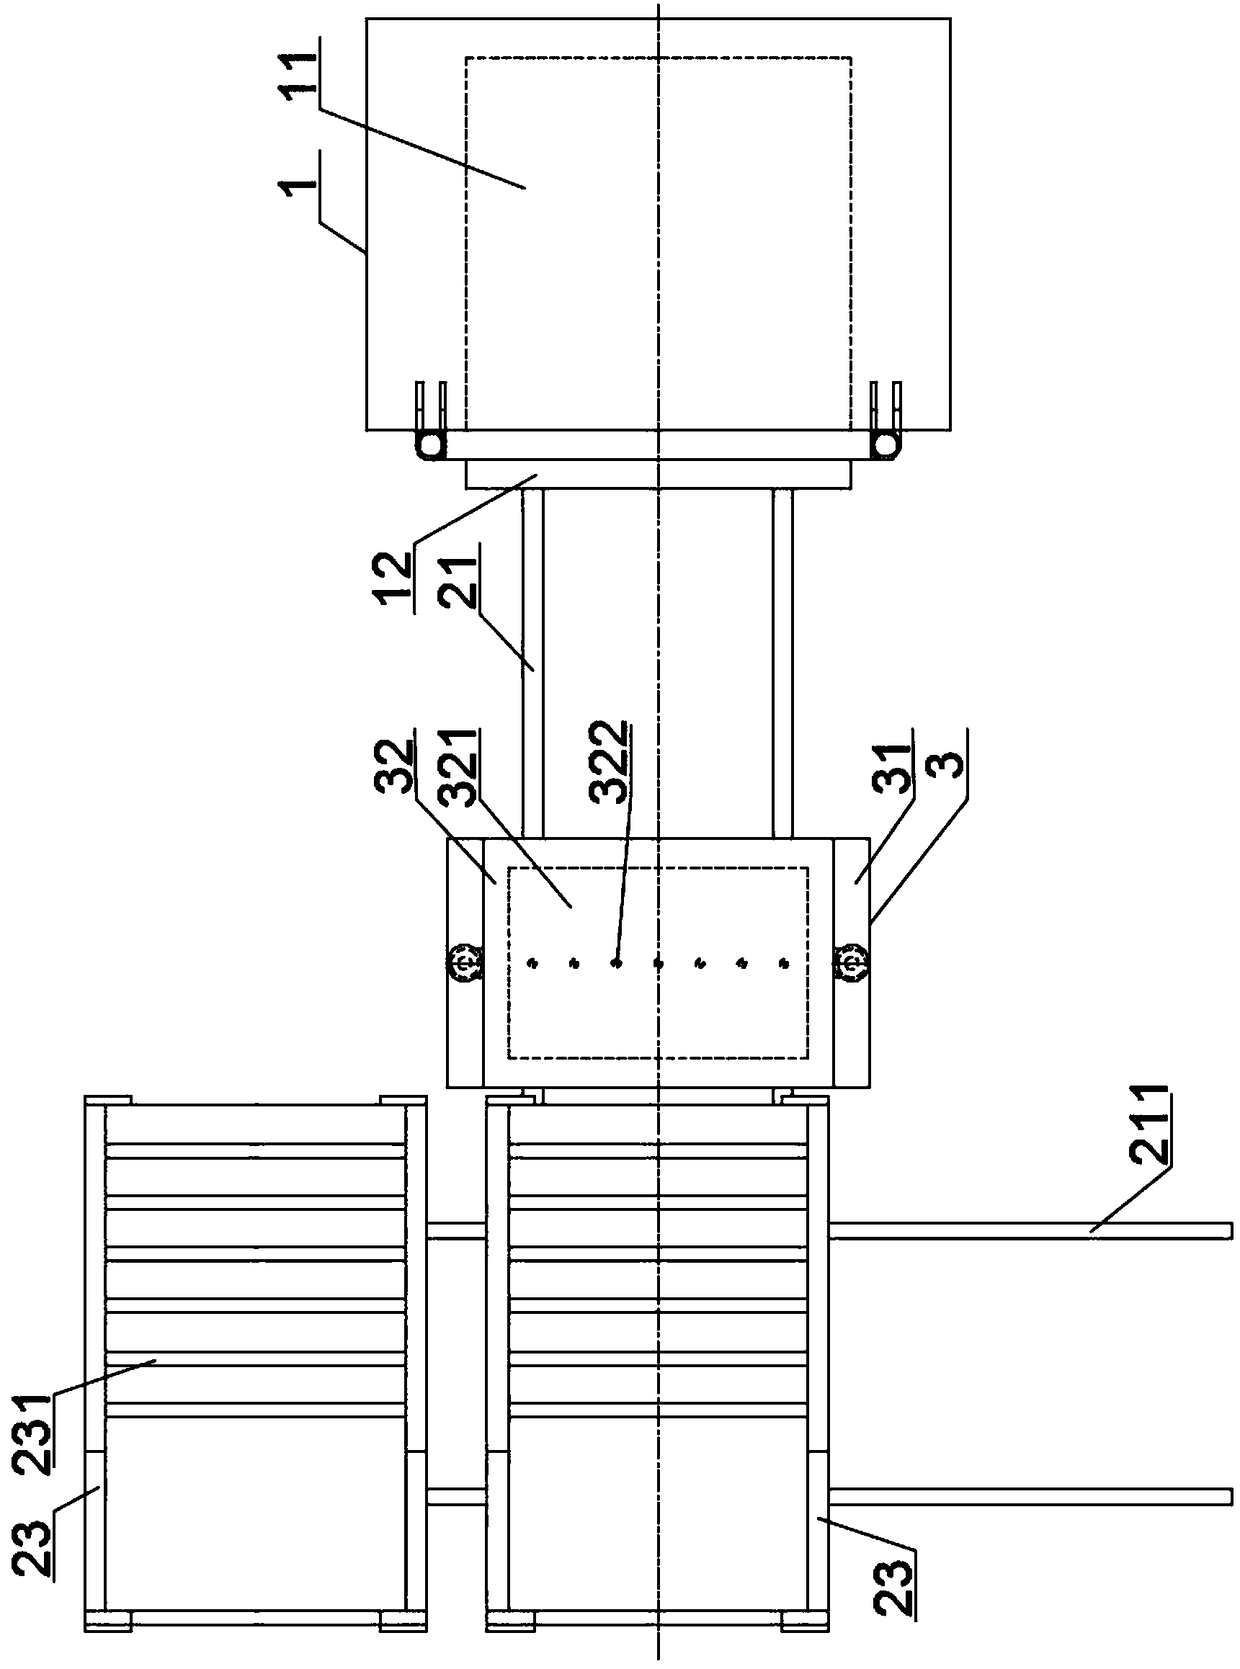 Steel wire rope end and anchor head lock automatic pouring system and control method thereof